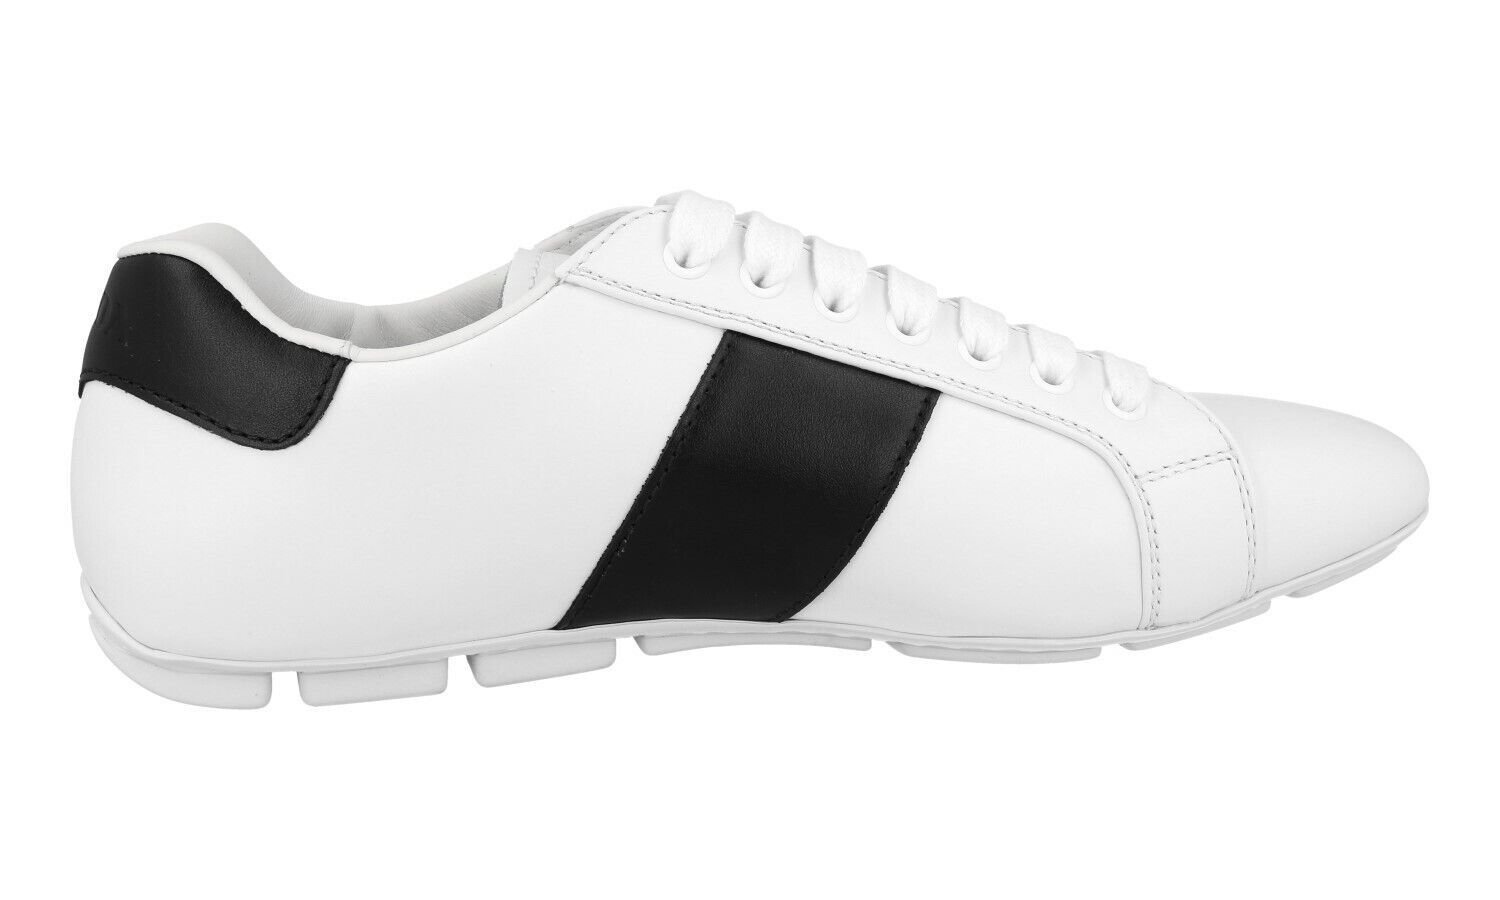 AUTH PRADA MONTE CARLO SNEAKERS SHOES 2EG373 WHITE LEATHER US 8.5 